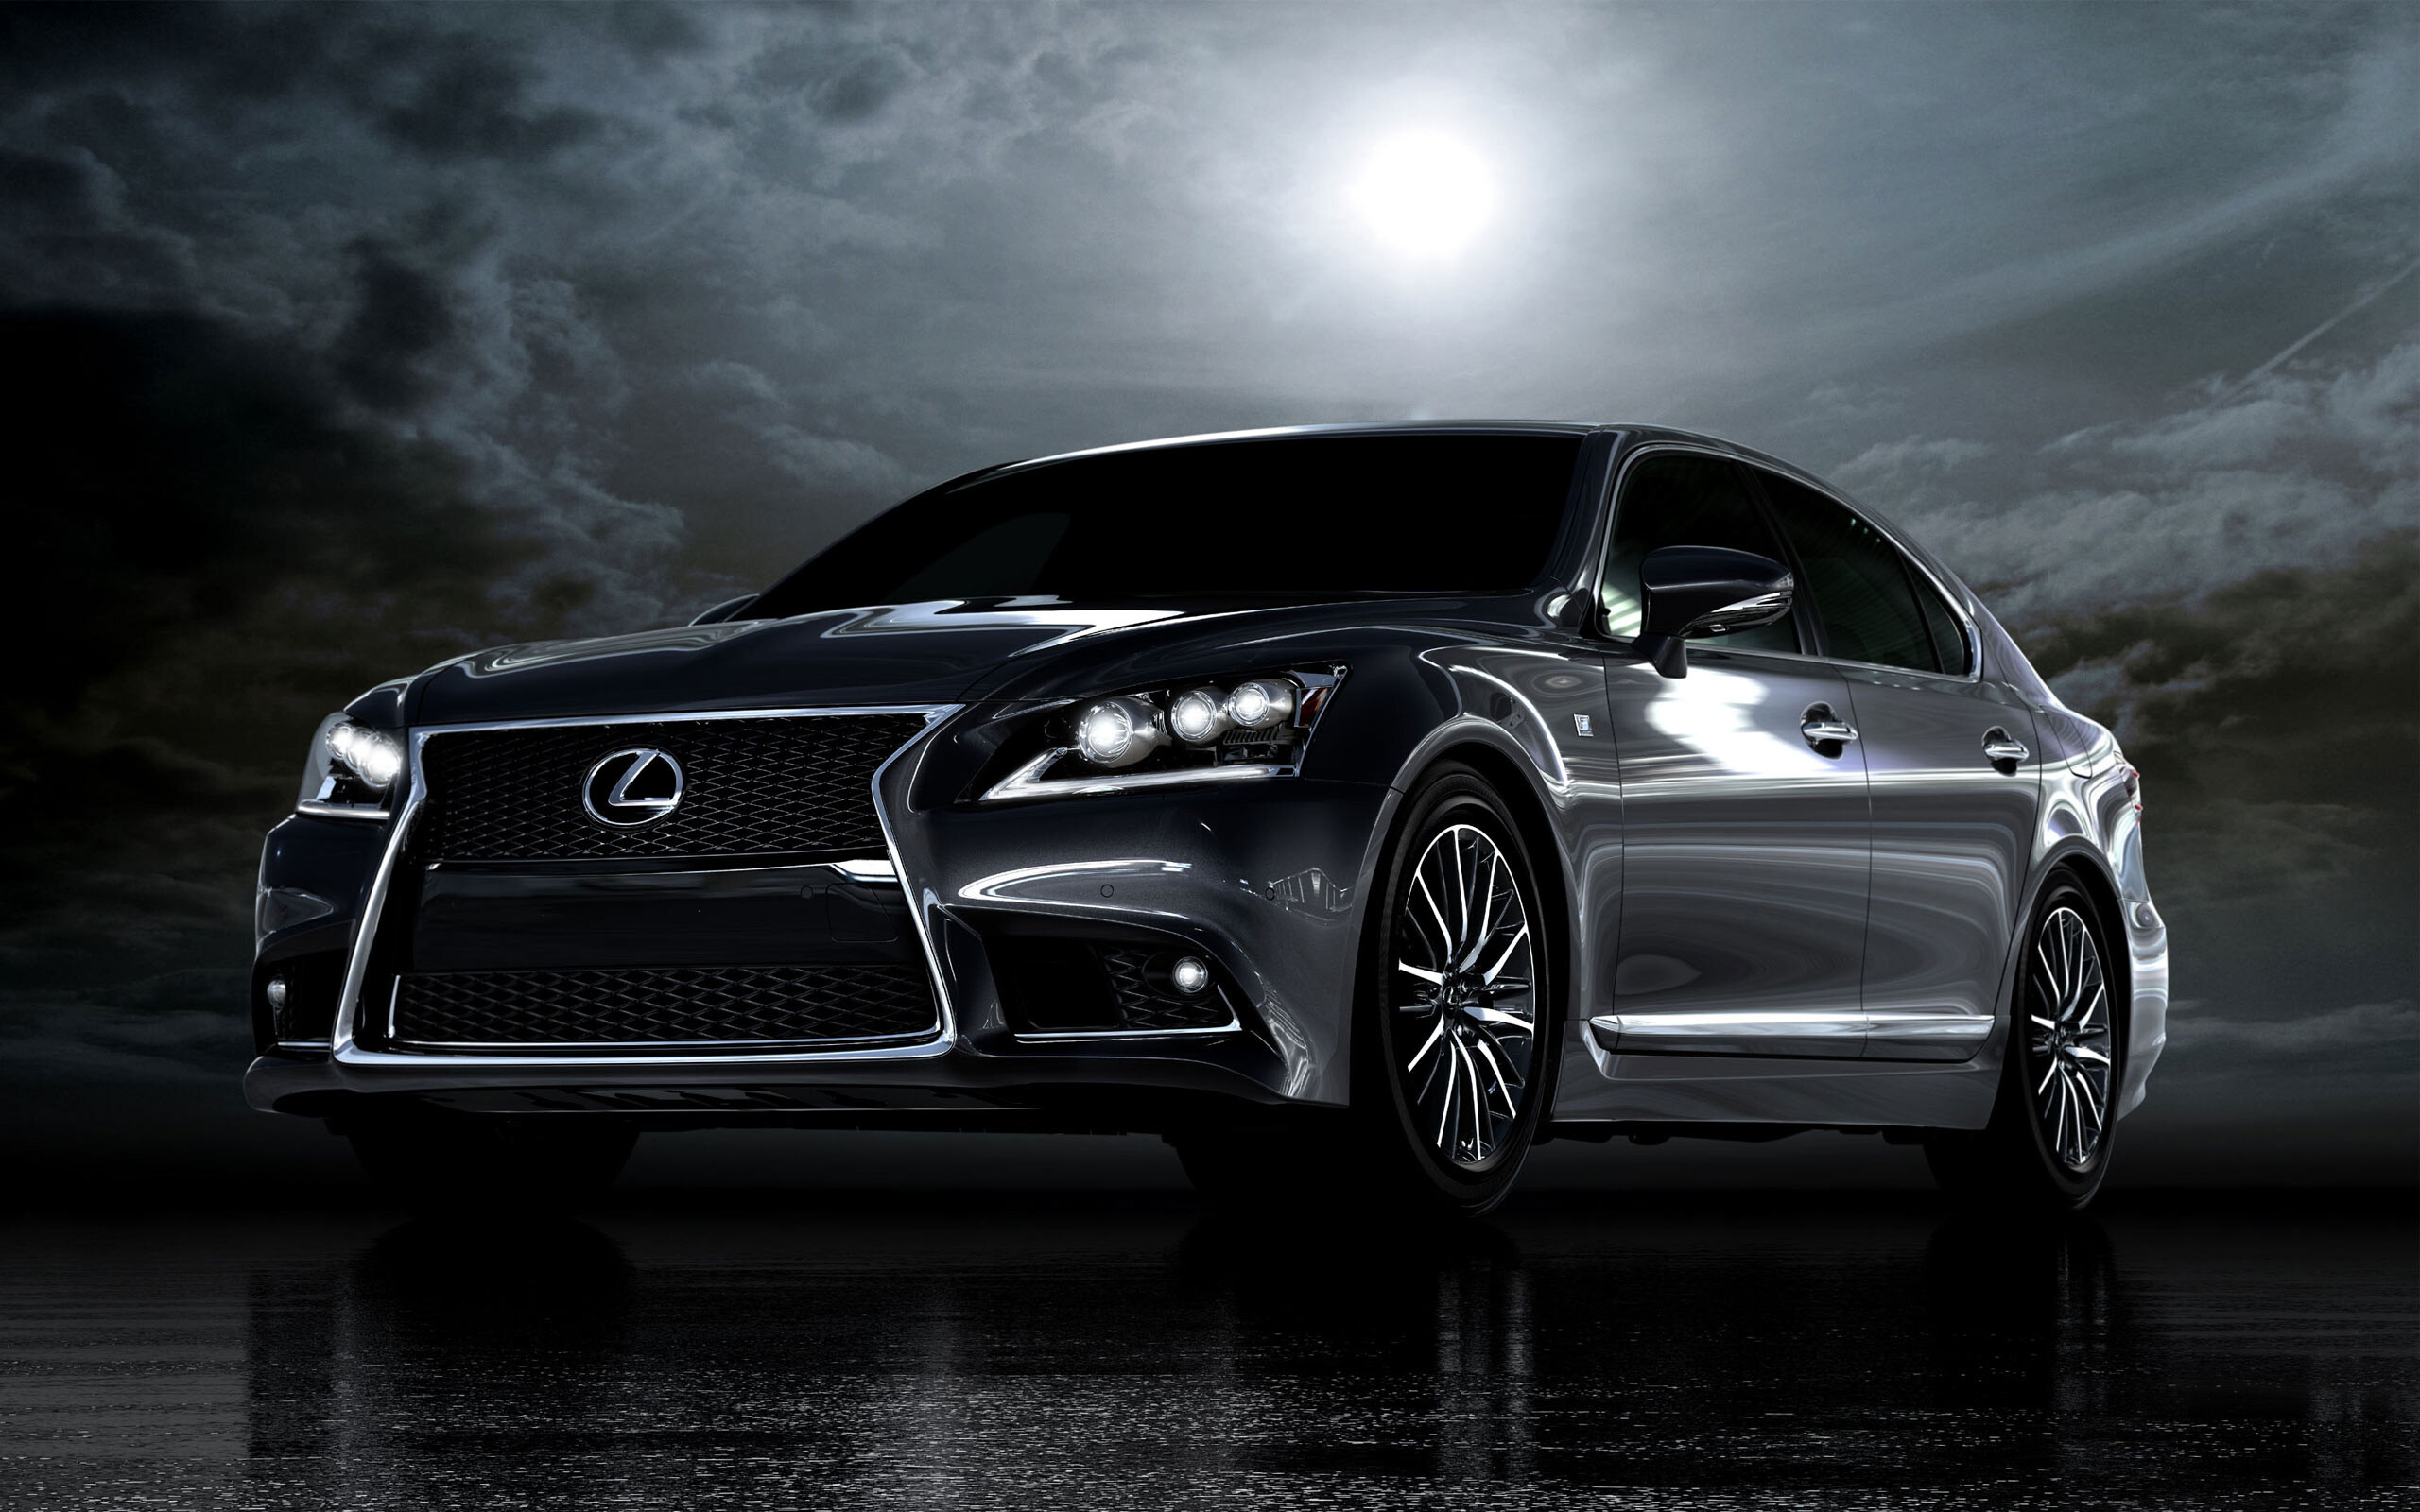 Lexus: Japanese brand, Started out with the LS and ES sedans before expanding to SUVs, coupes, convertibles. 2560x1600 HD Wallpaper.